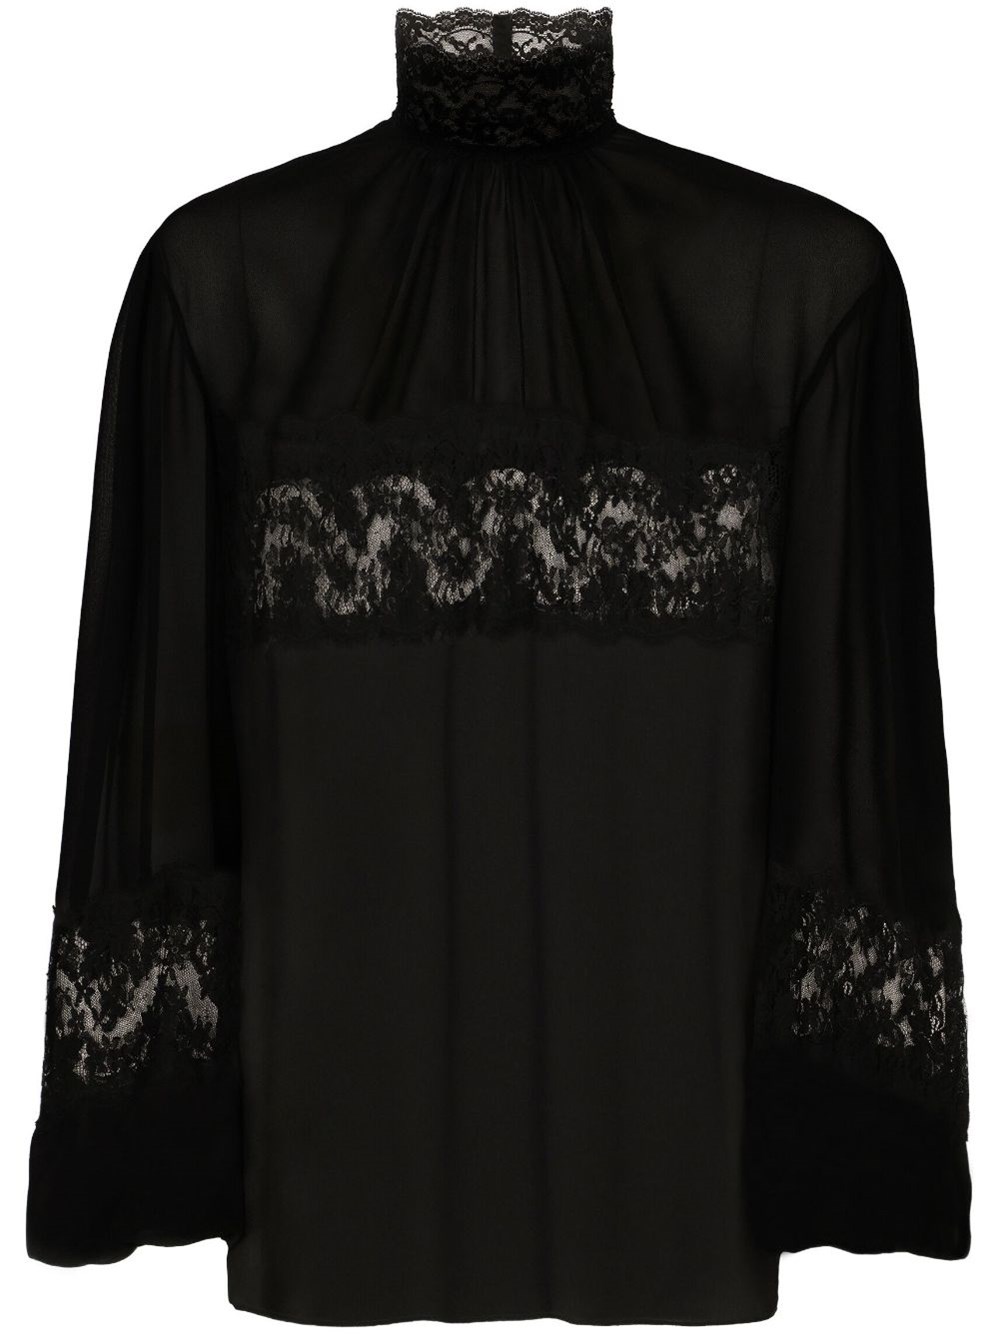 DOLCE & GABBANA SHIRT WITH LACE DETAILS